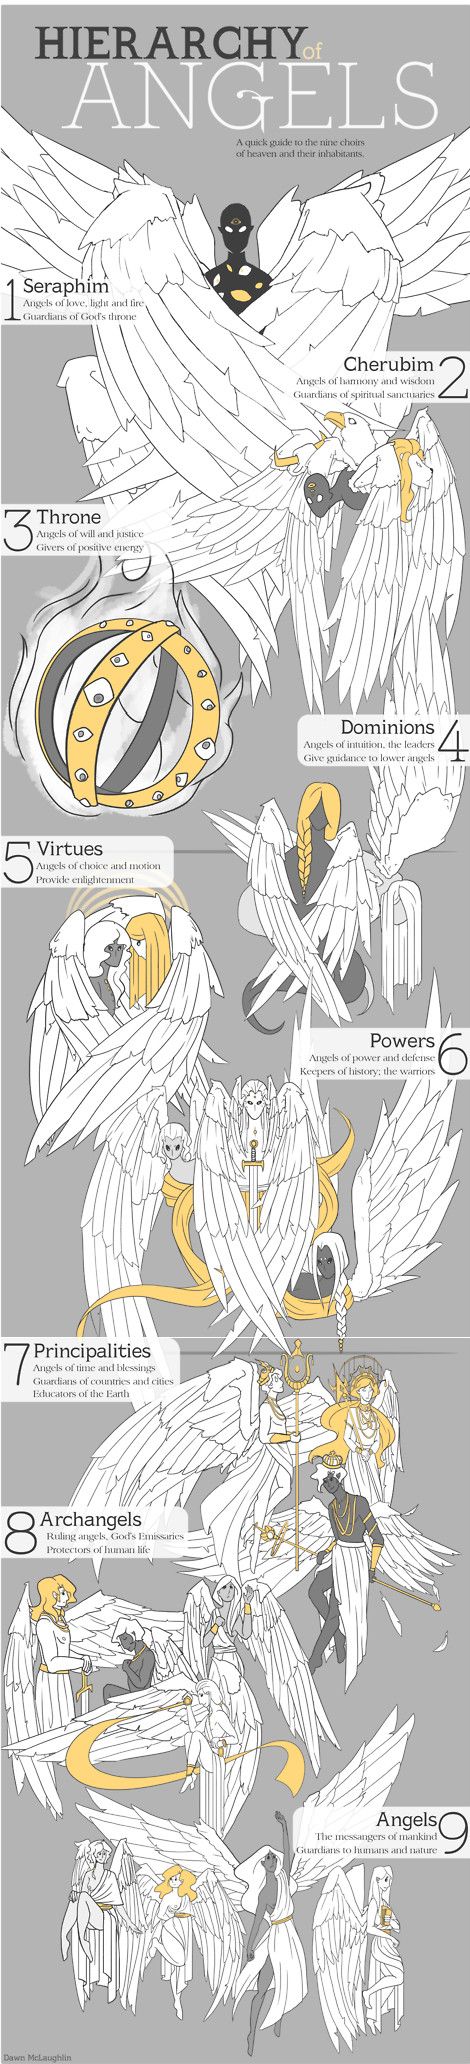 Hierarchy of Angels: The Nine Choirs of Heaven - failmacaw